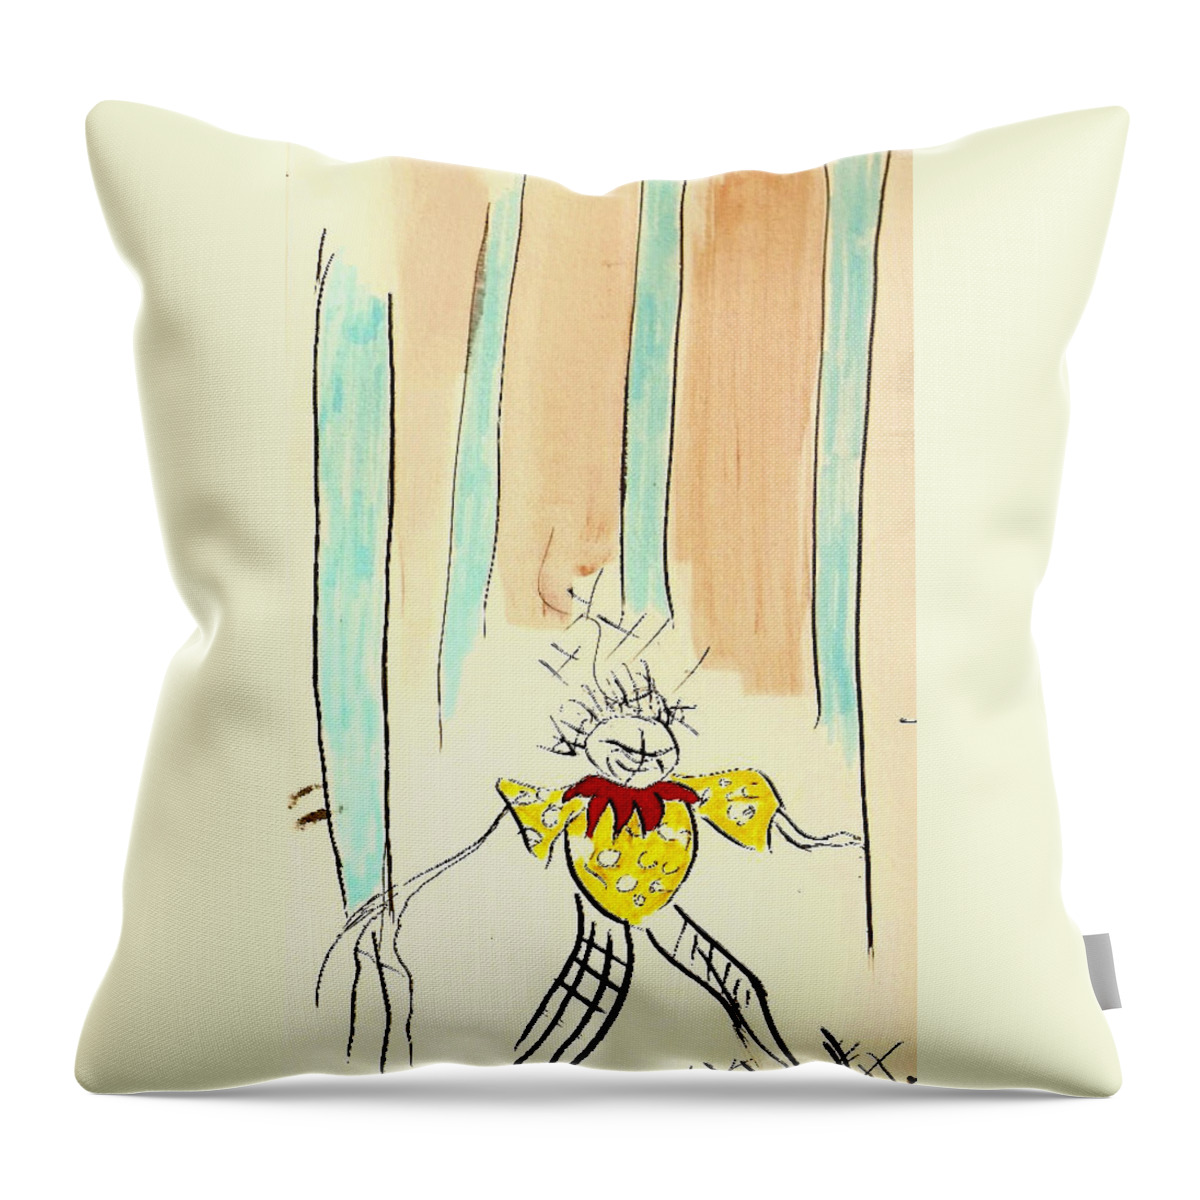 Watercolor Throw Pillow featuring the painting Stumble by Jeff Barrett